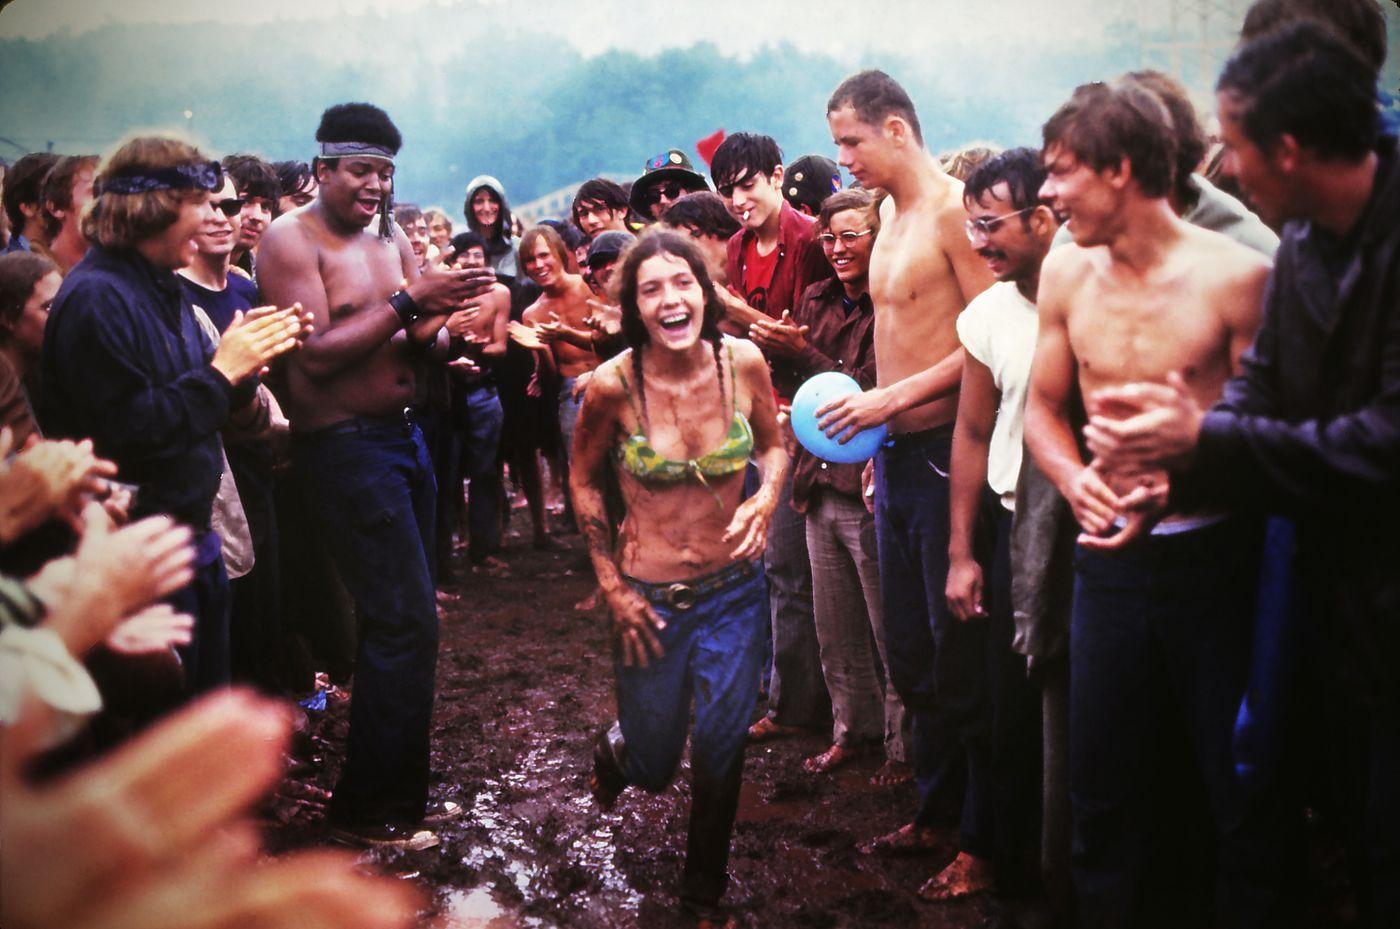 Woodstock S 50th Anniversary Only Highlights The Failures Of